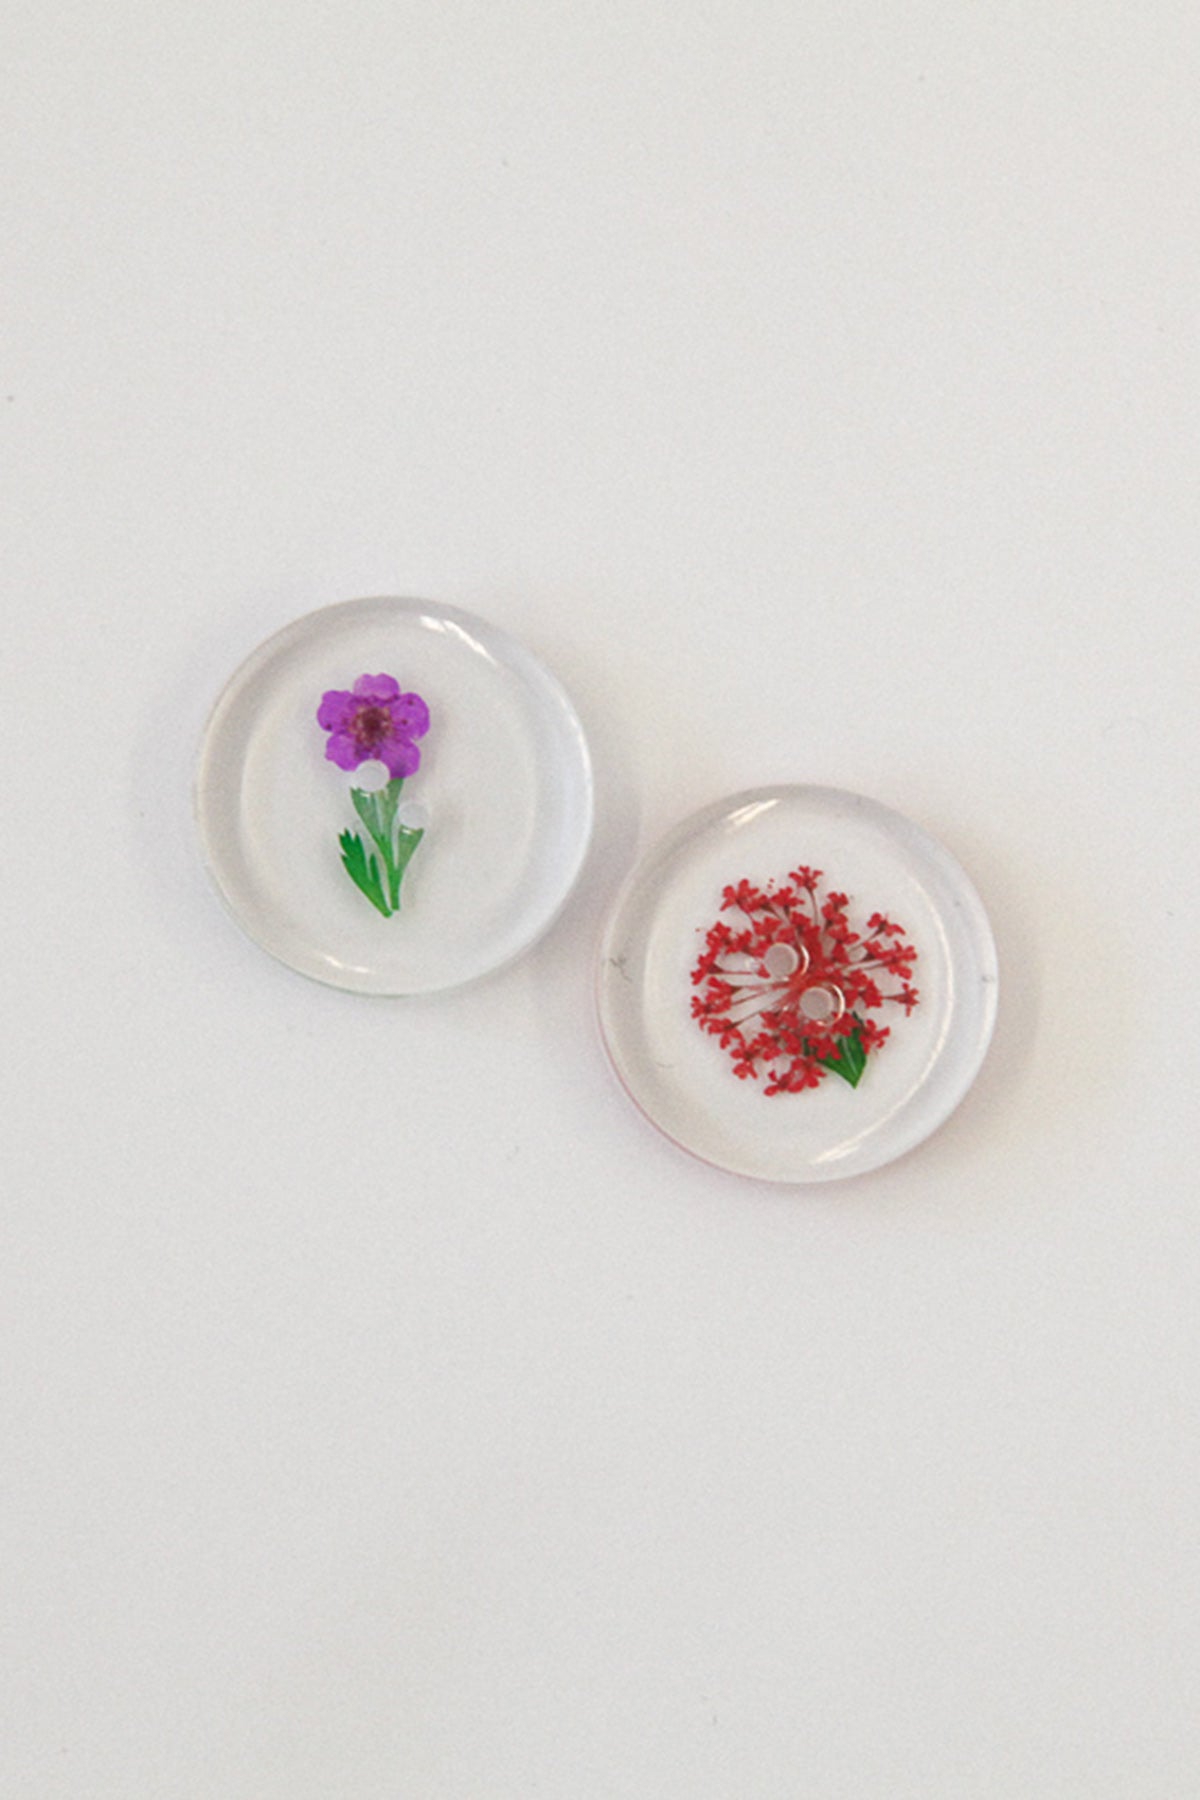 Flower Buttons, Flowery Buttons, Floral Buttons - Totally Buttons